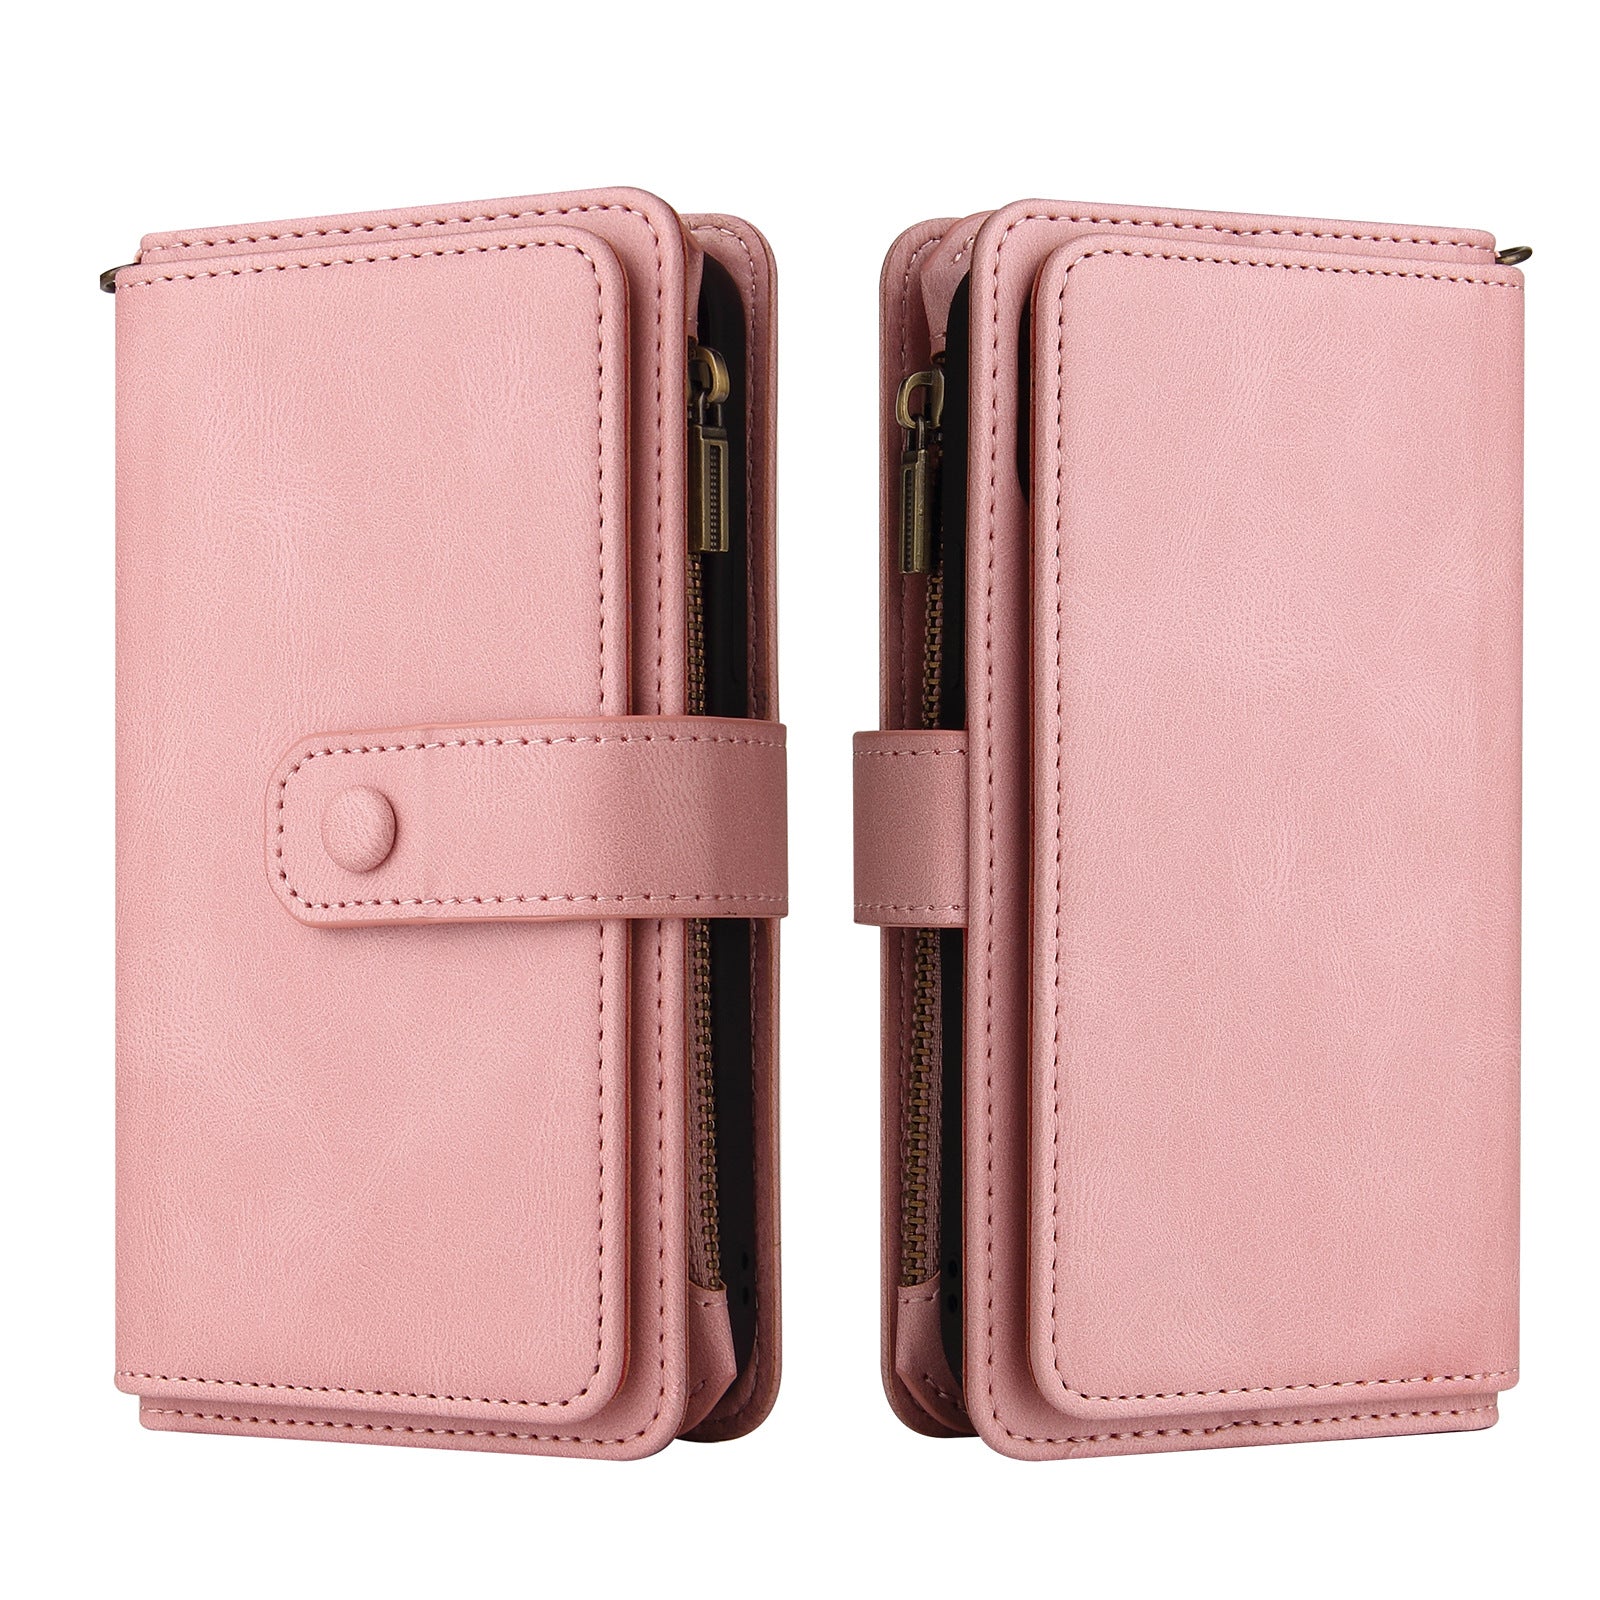 Samsung Galaxy Z Fold 3 Zipper Phone Case Wallet with Multi Card Slots Kick Stand